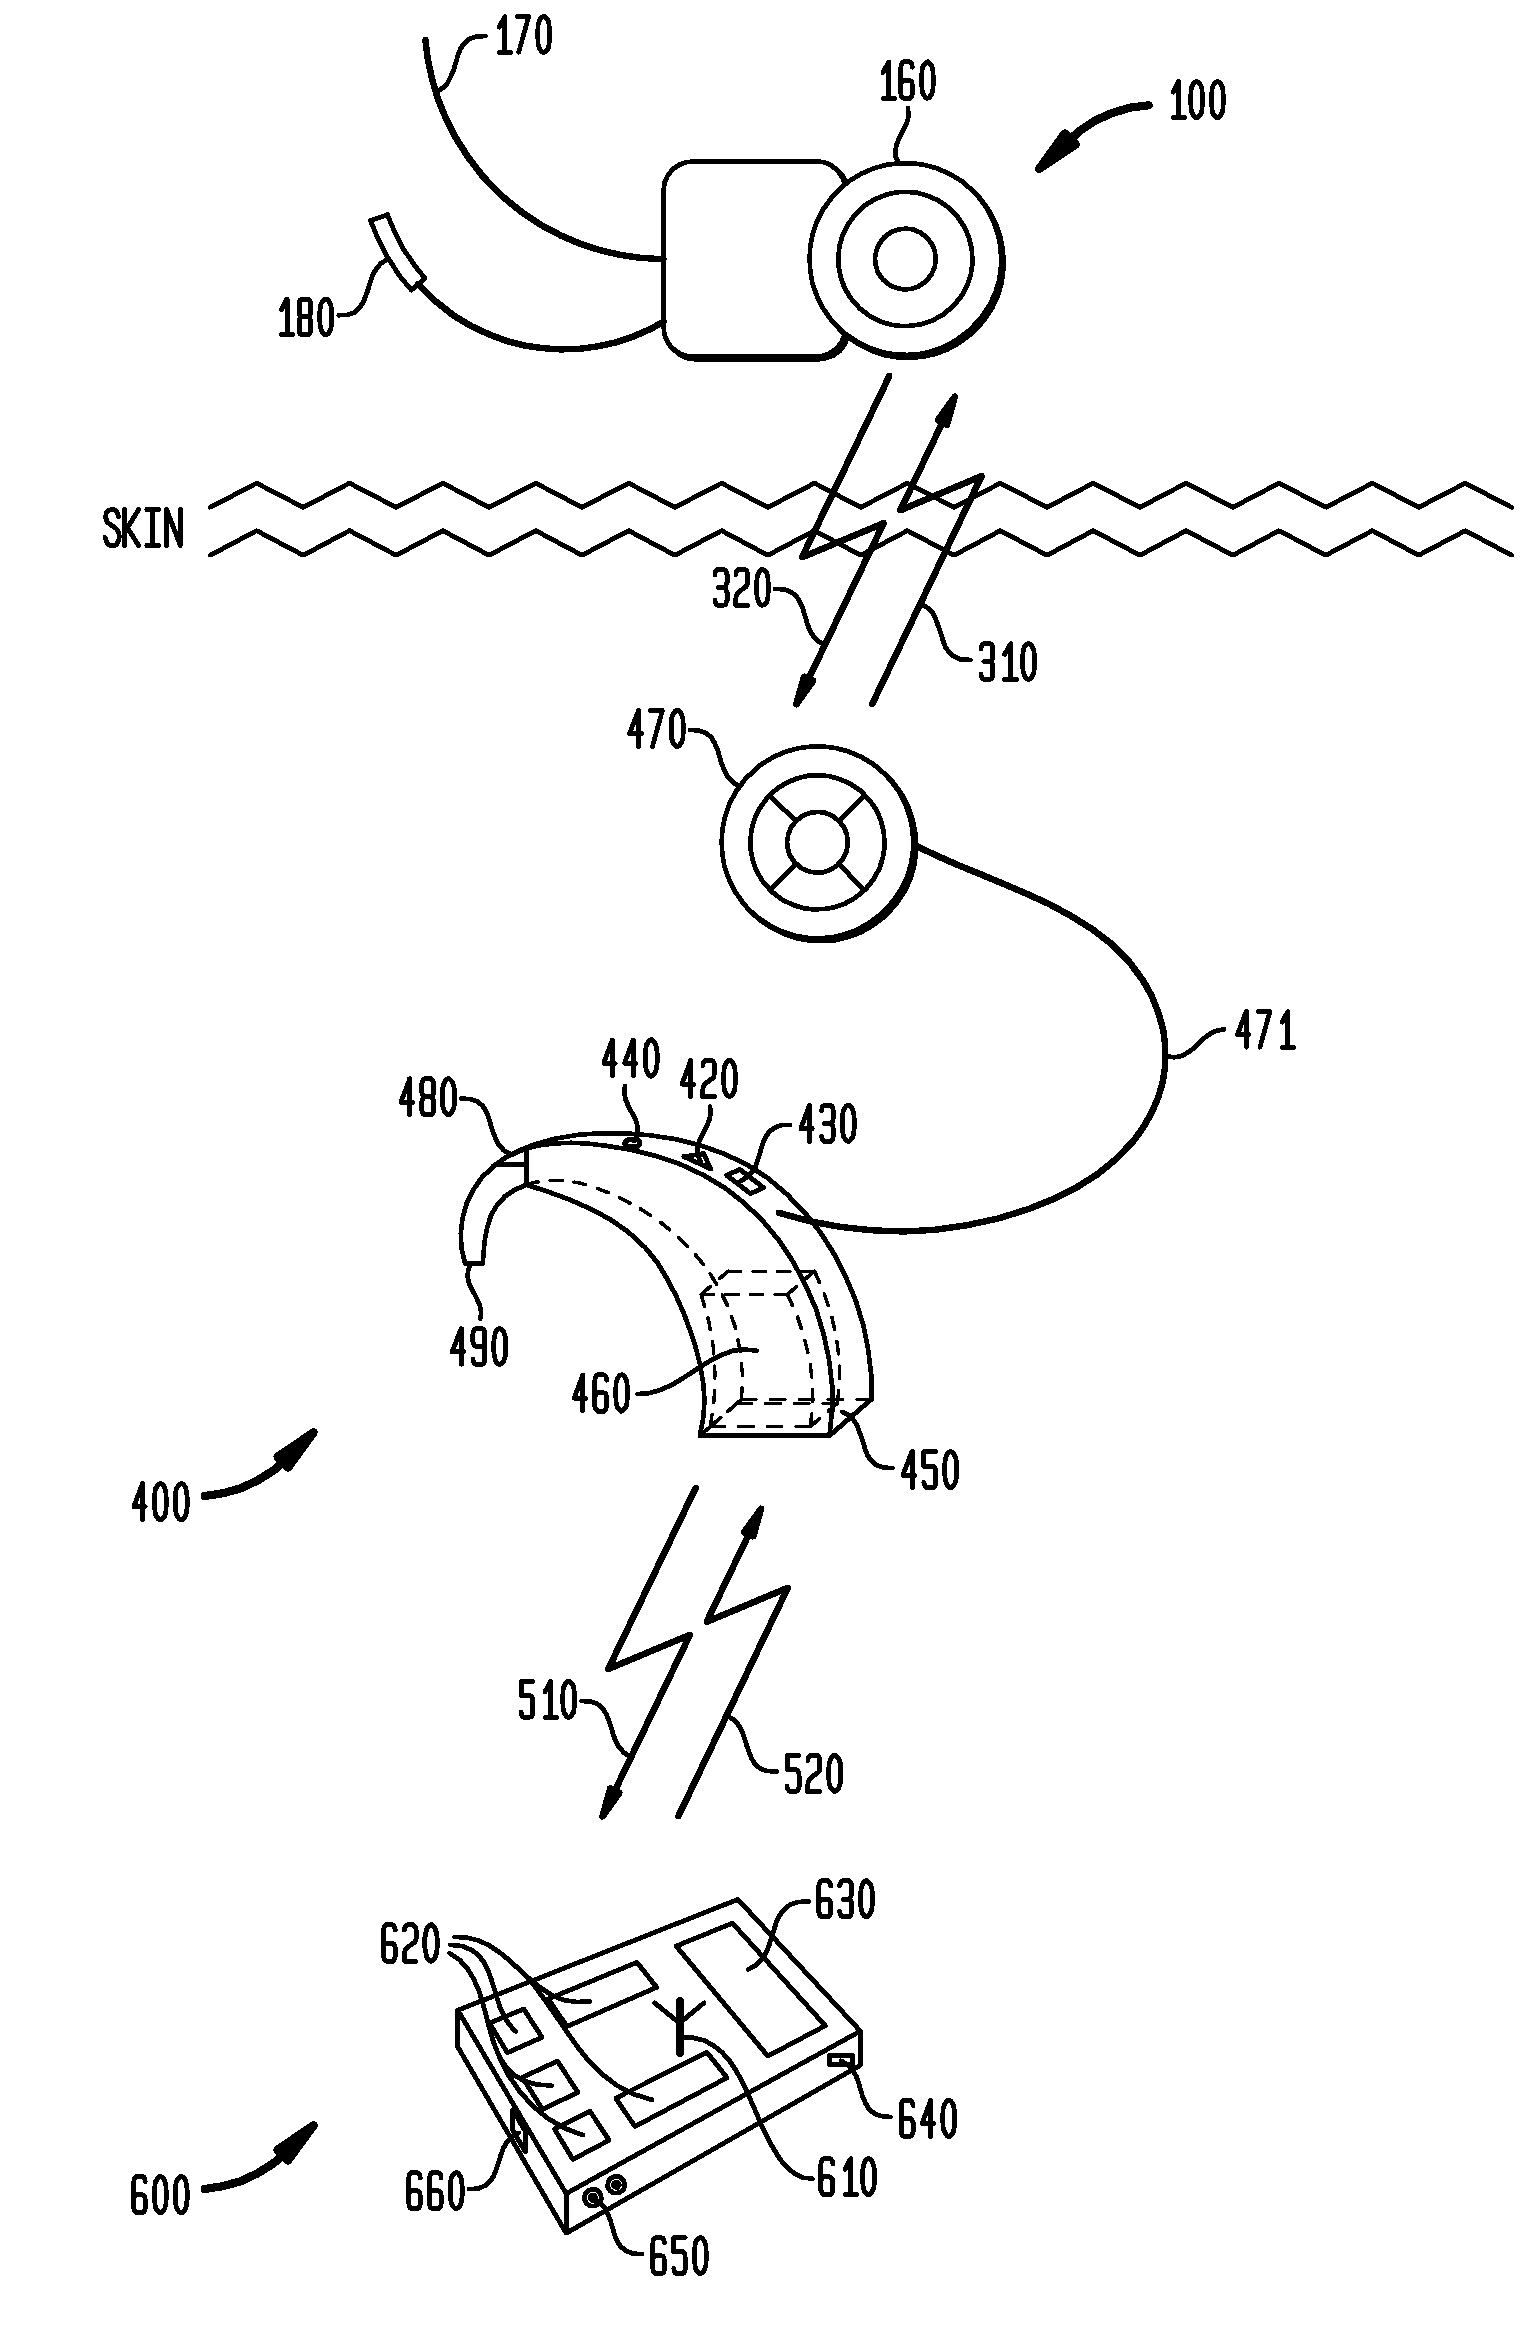 Wireless communication between devices of a hearing prosthesis